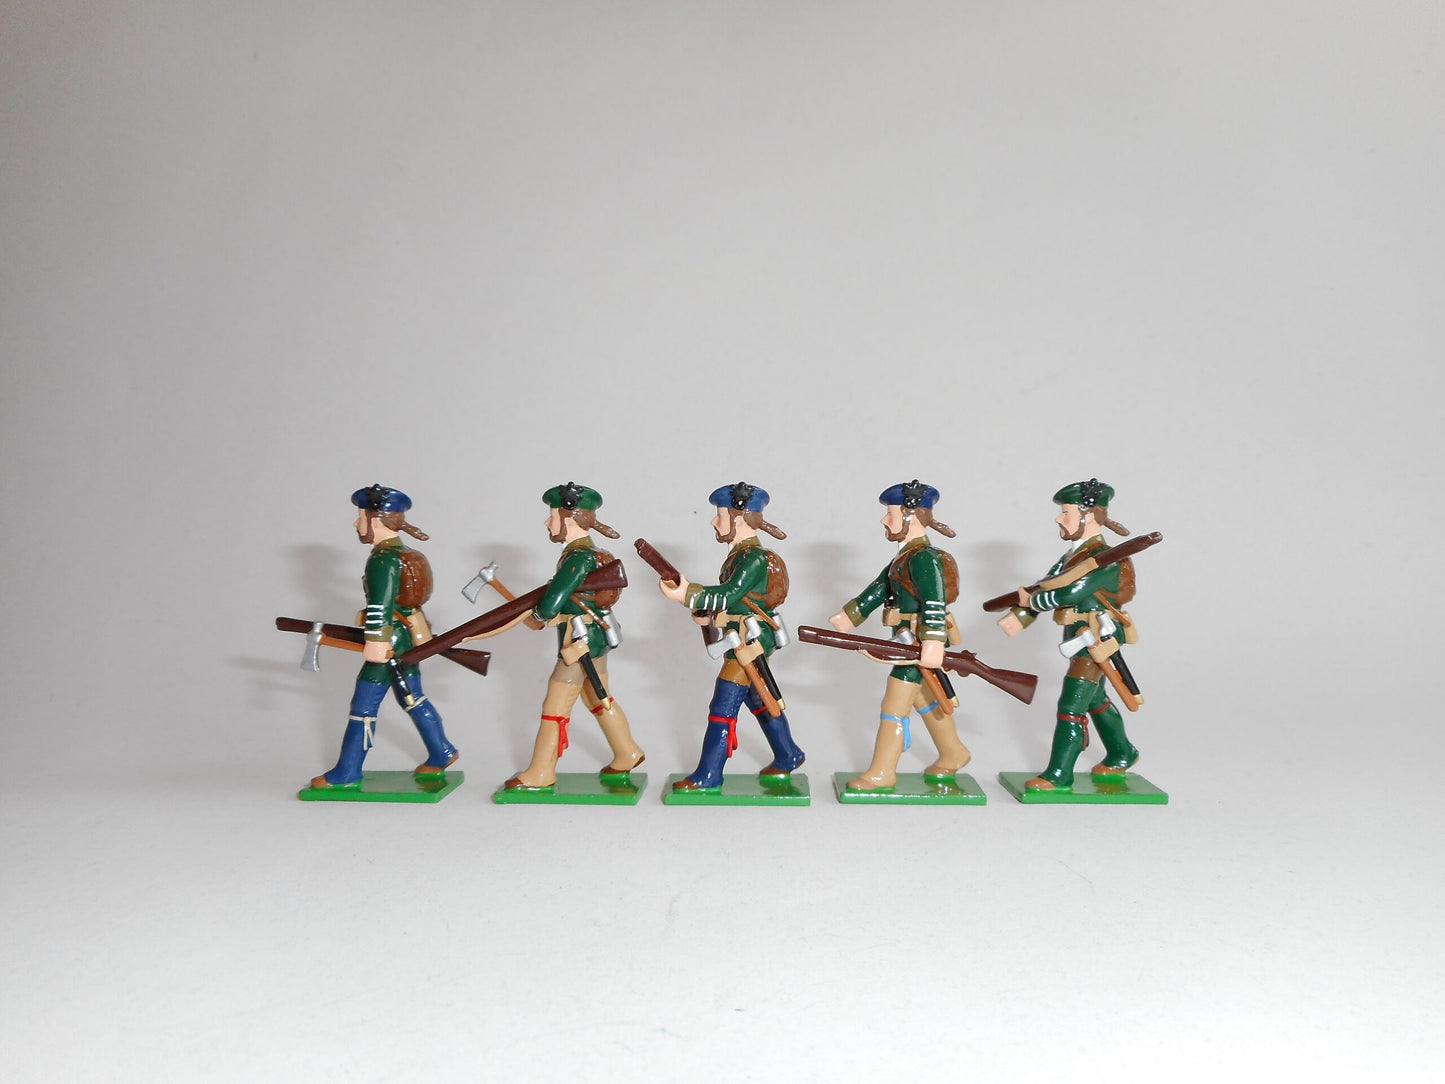 Side view of Collectible toy soldier miniature army men Rogers' Rangers figurines.